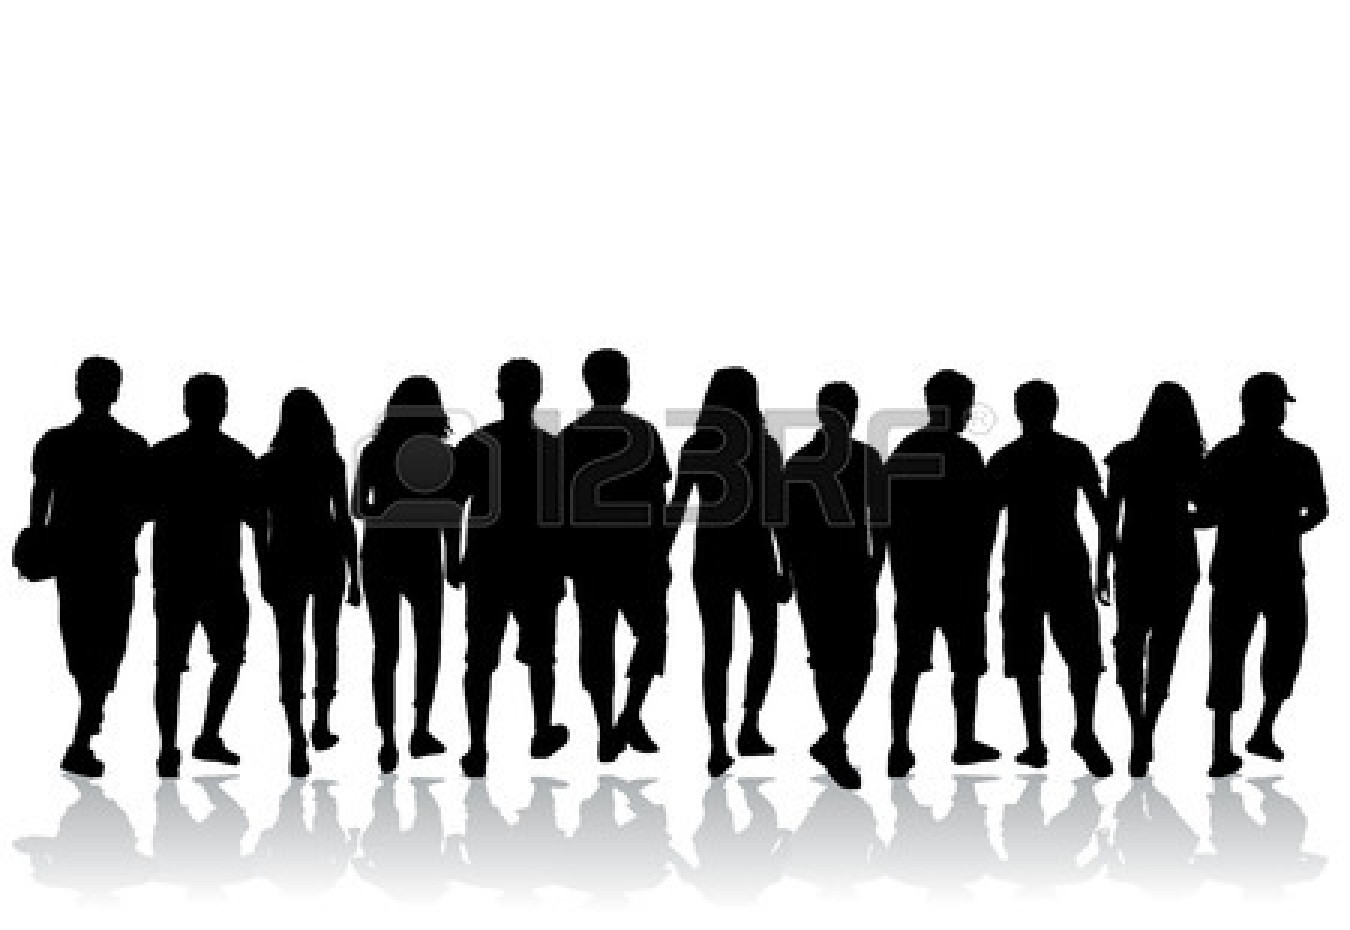 Crowd Of People Images 24020507 Crowd Of People  Vector Silhouettes